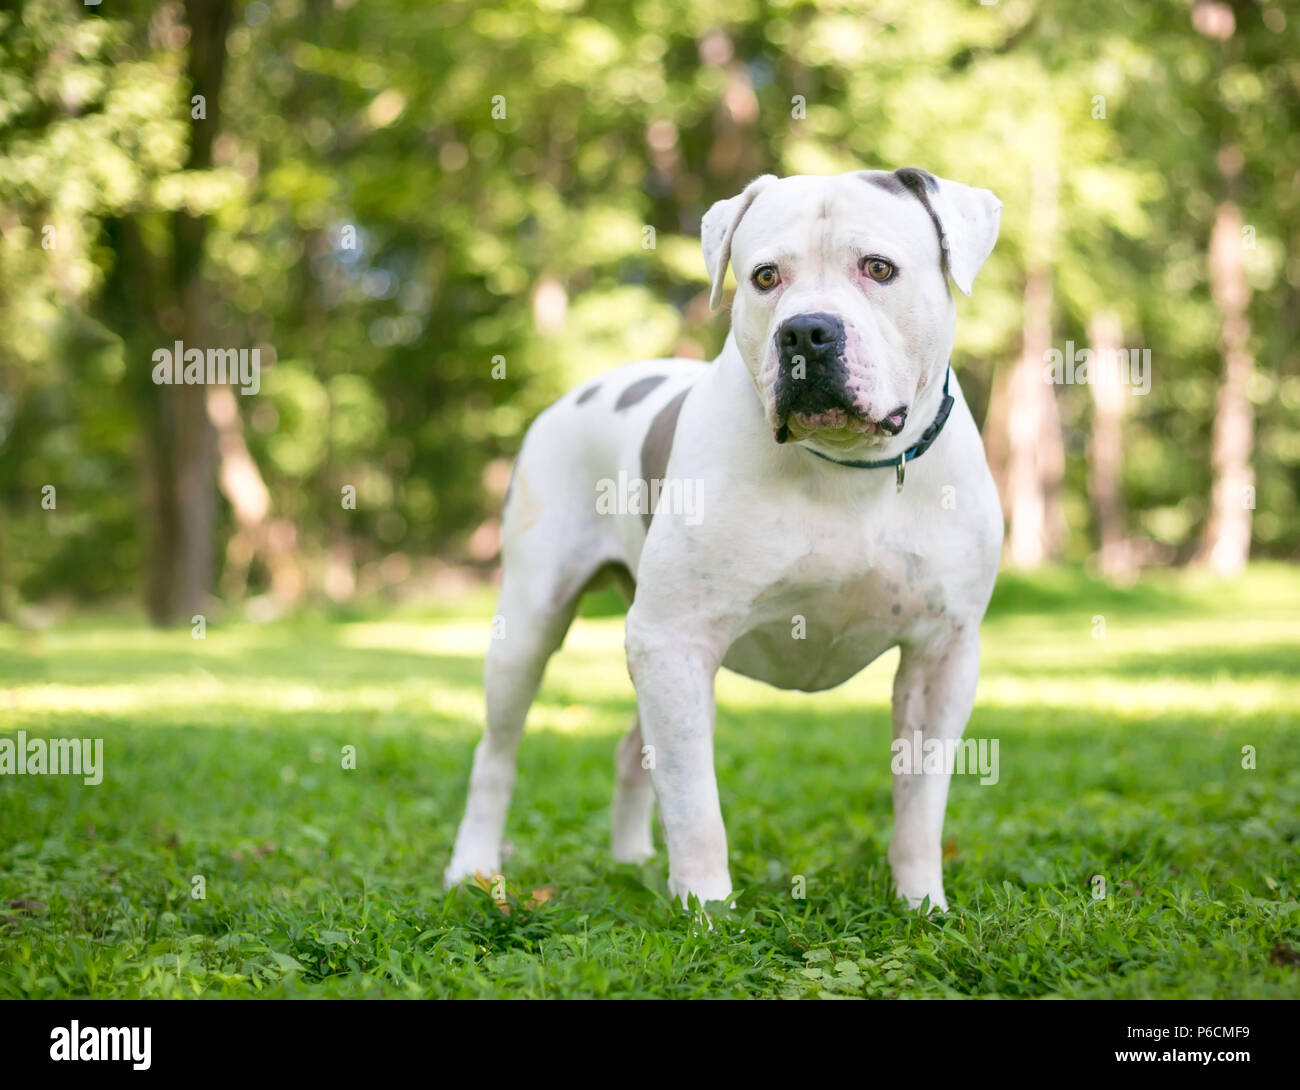 A white American Bulldog mixed breed dog with brown spots standing outdoors Stock Photo